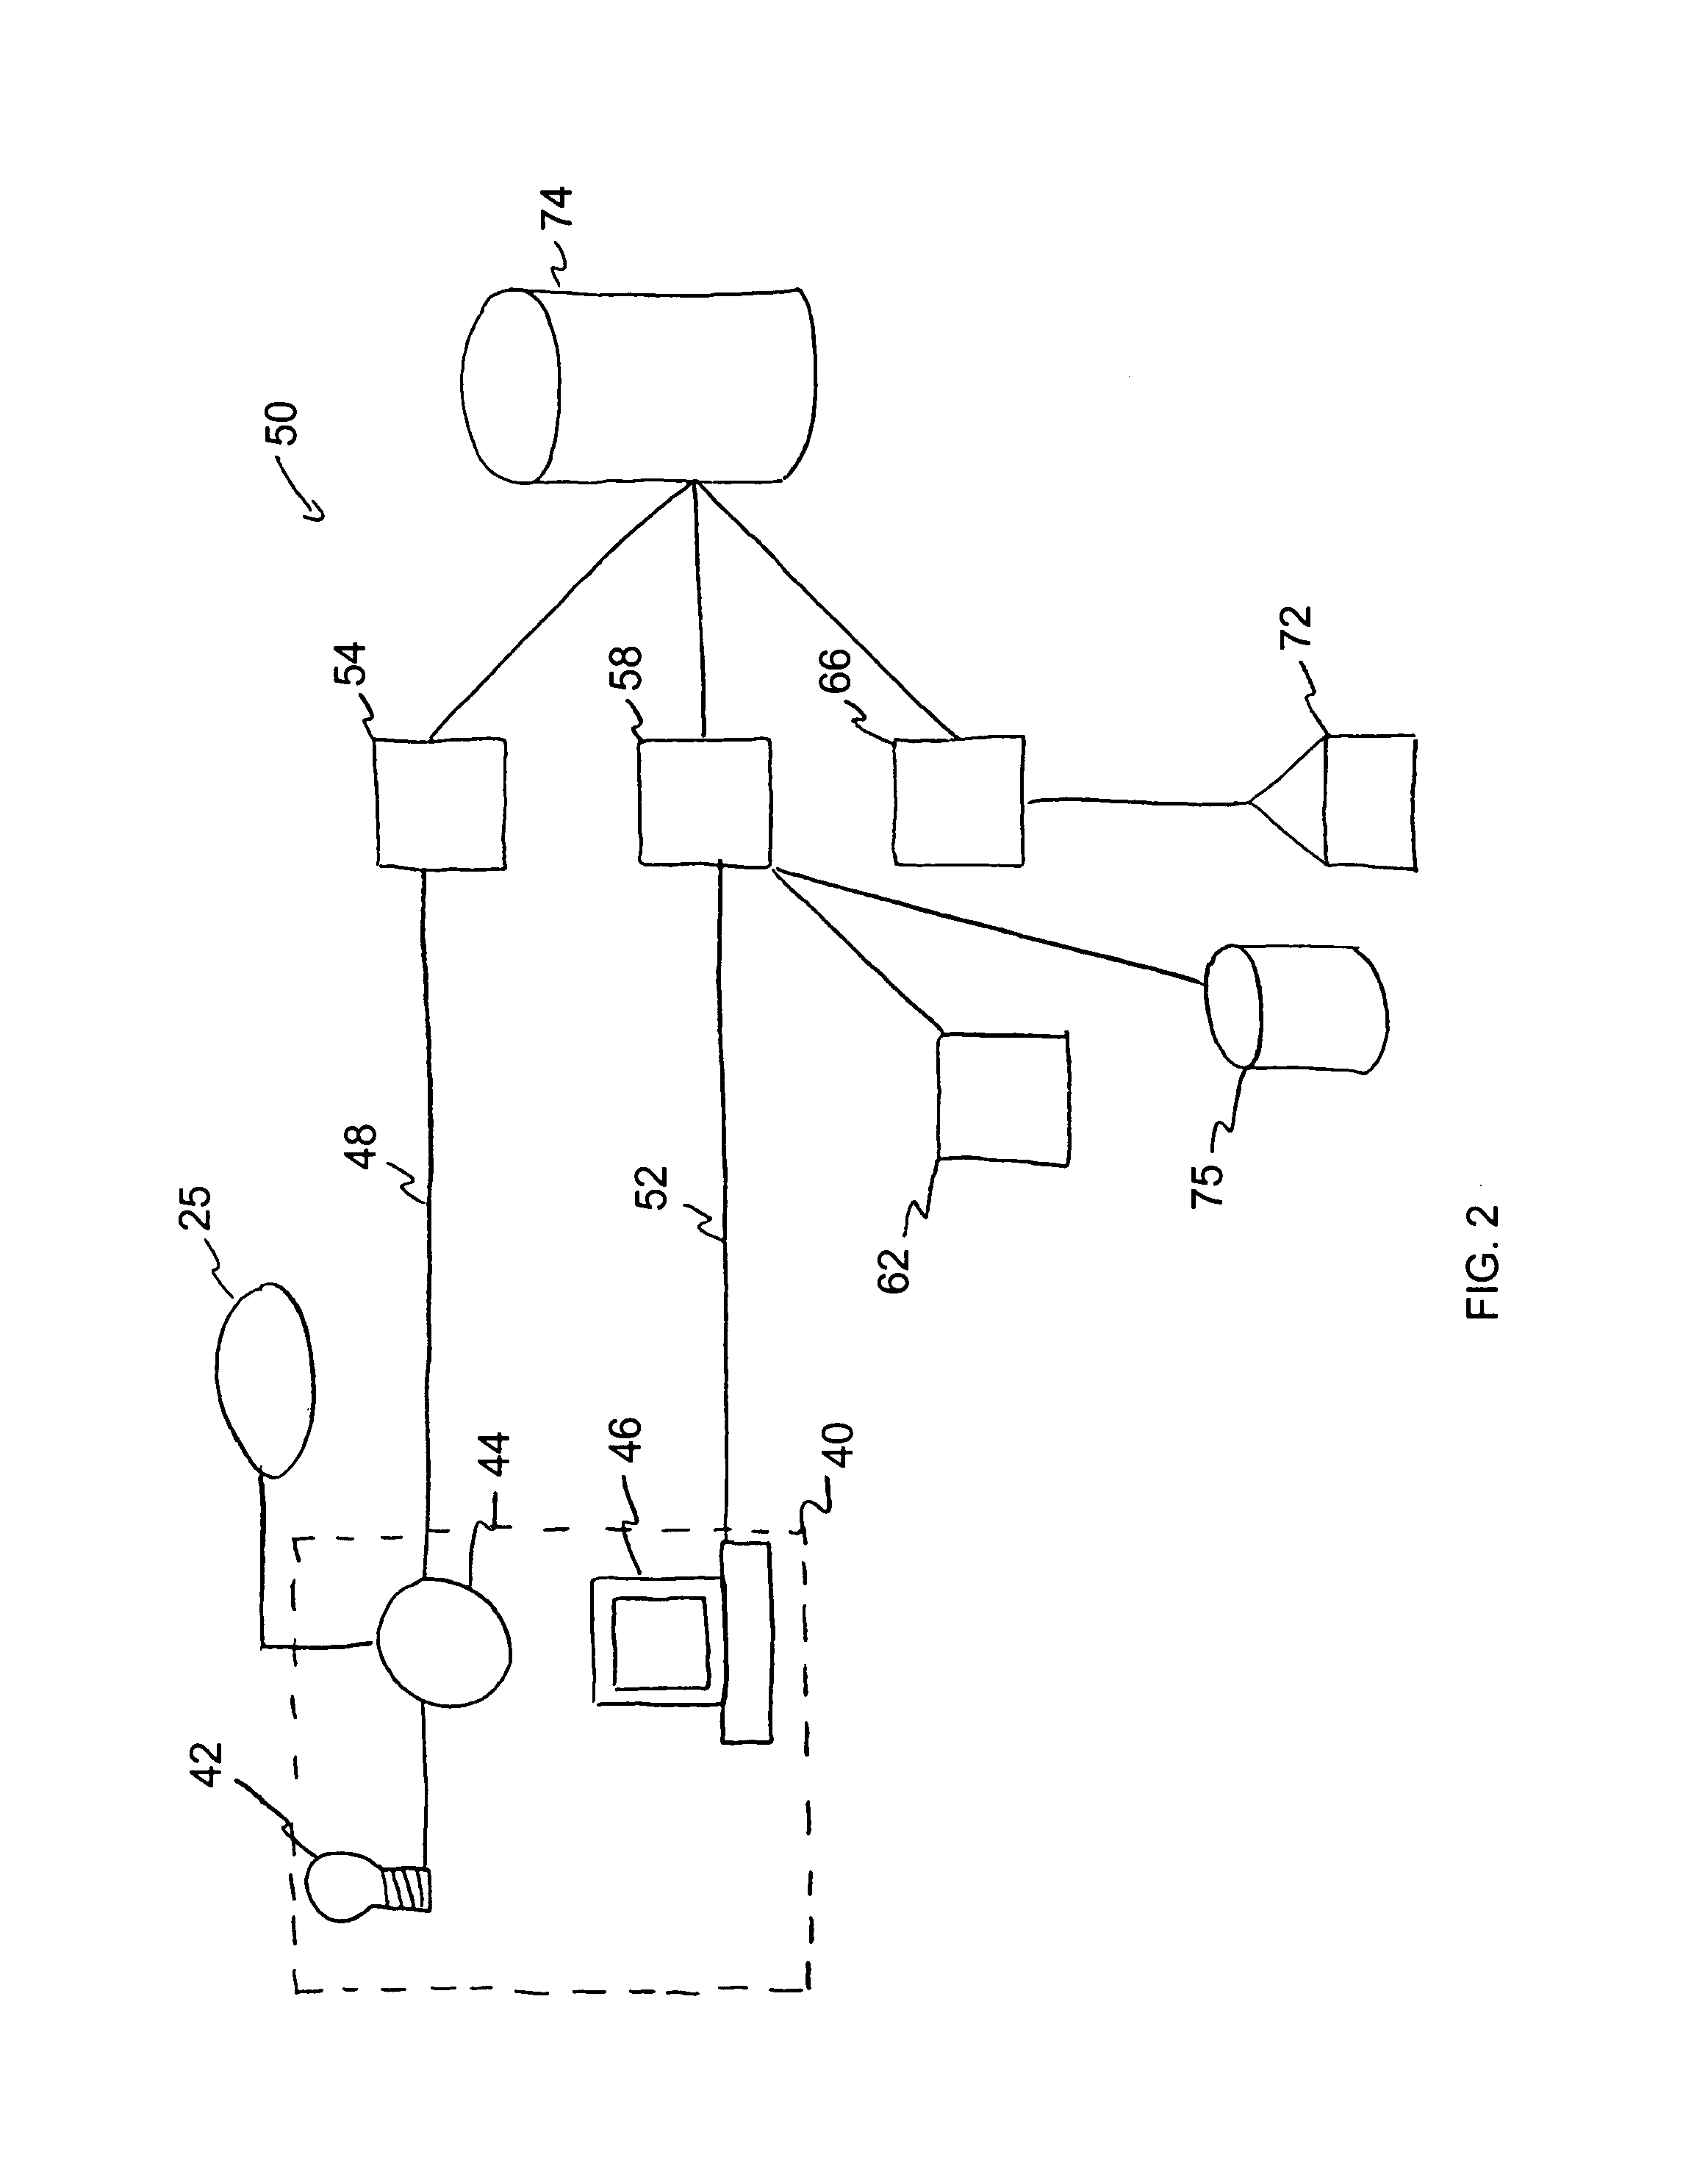 Method and apparatus for metering electricity usage and electronically providing information associated therewith